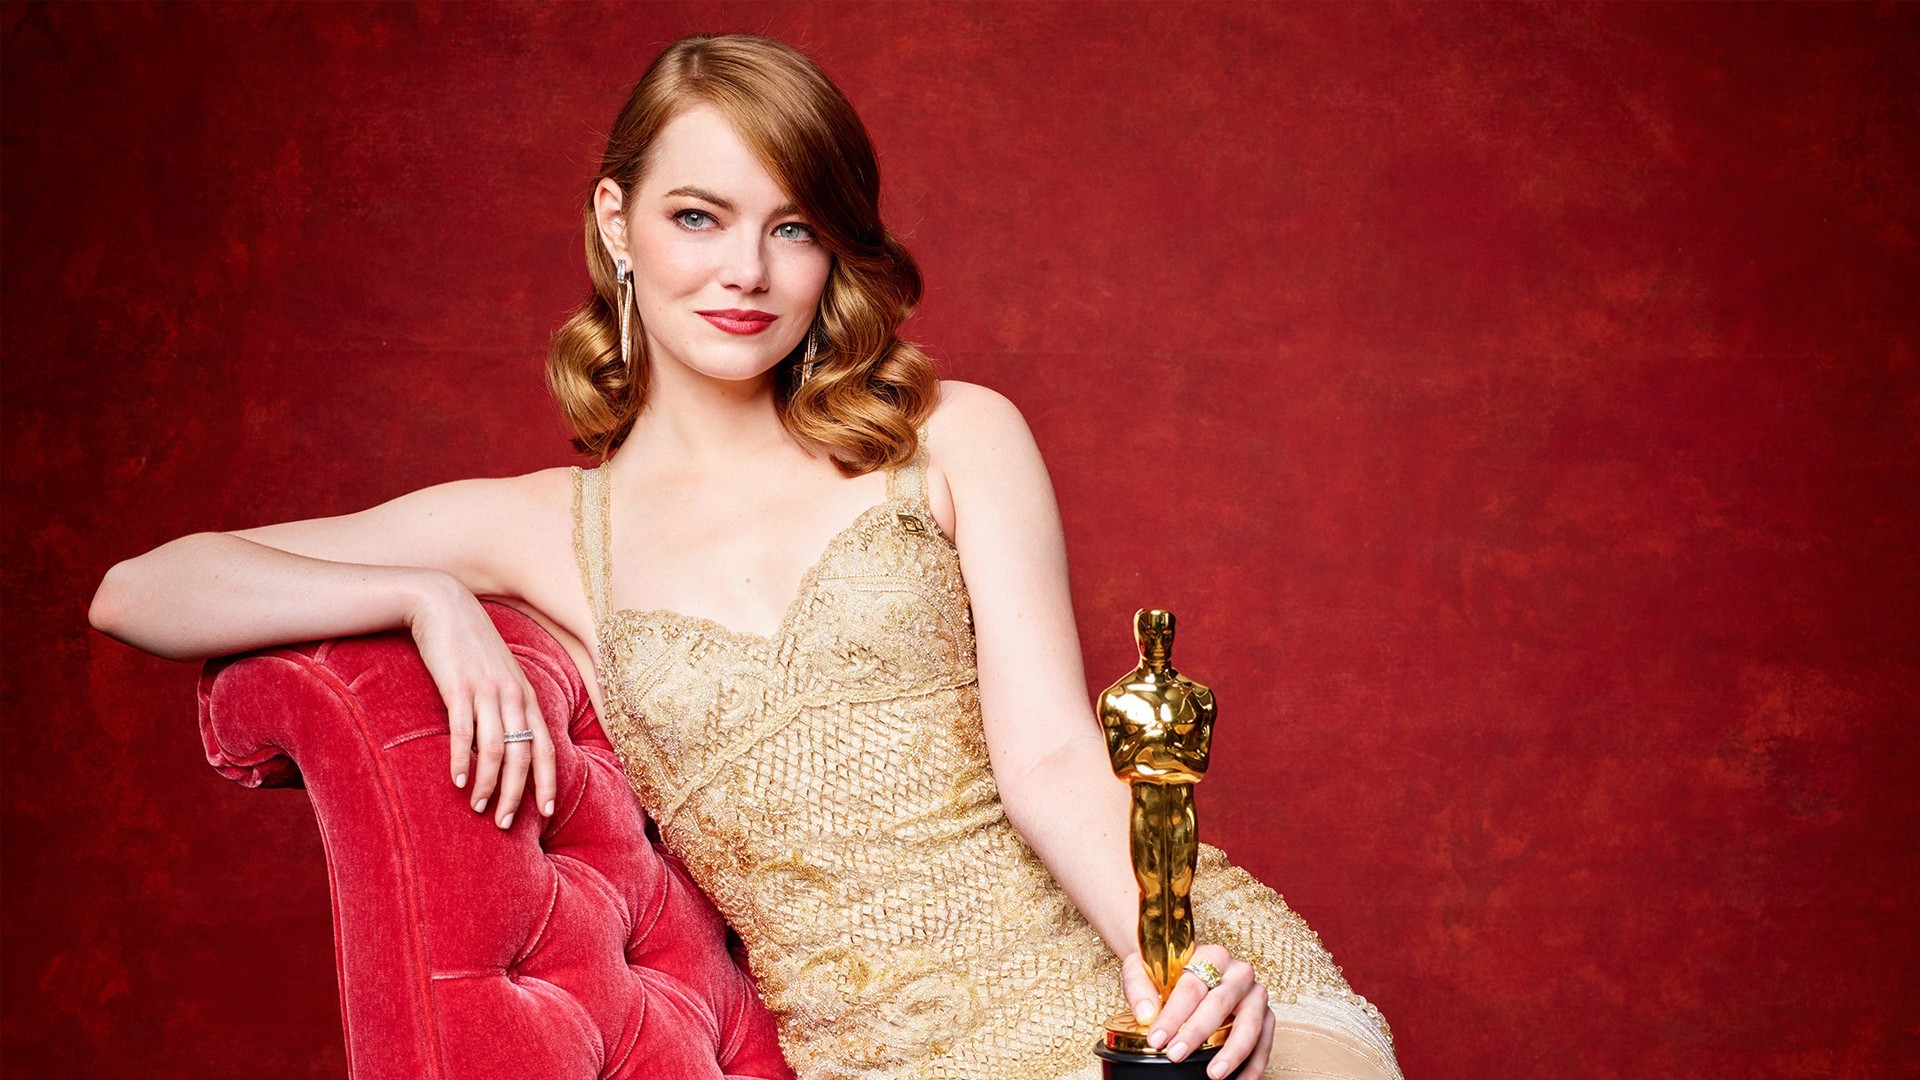 Women Celebrity Emma Stone Oscars Red Redhead Gold Red Background Actress Red Lipstick Red Chair Rin 1920x1080